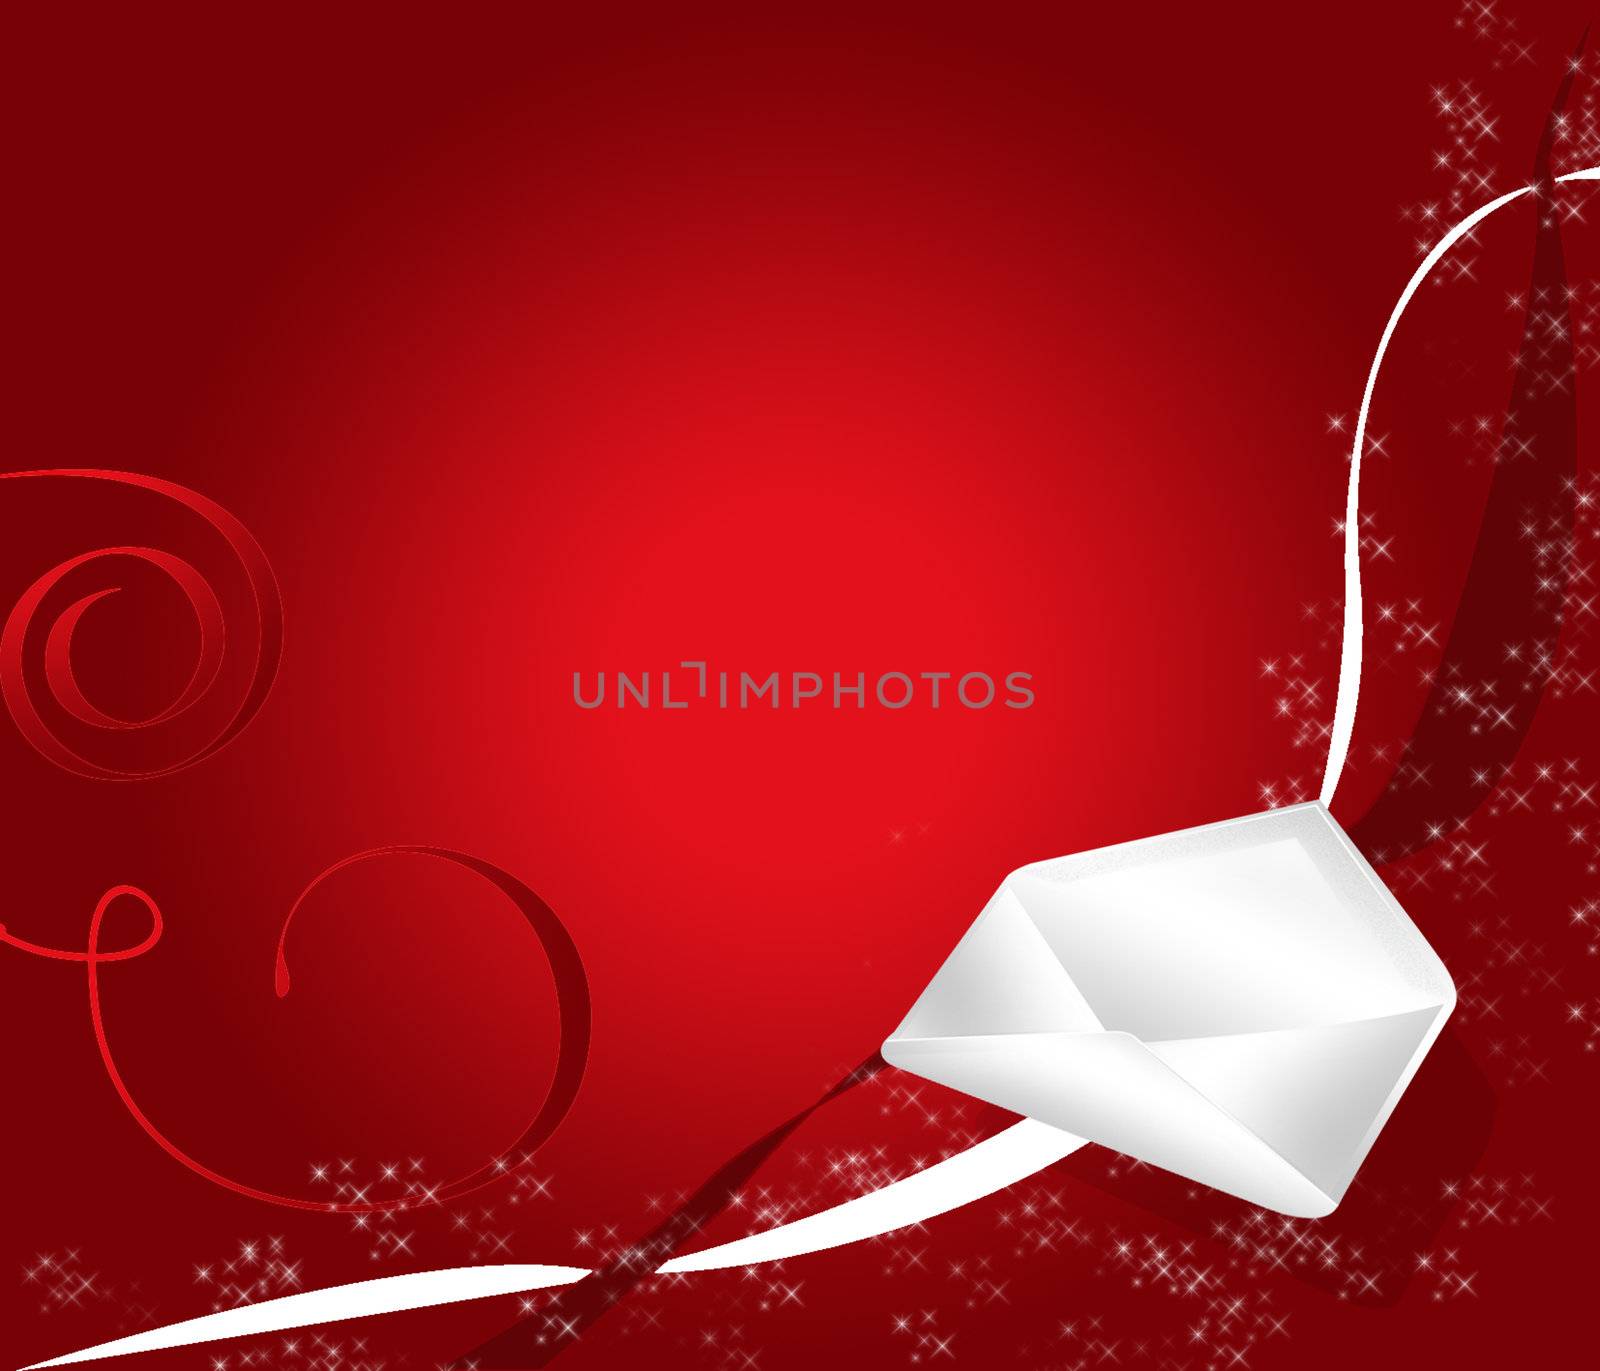  	 greeting card with a red background gradie